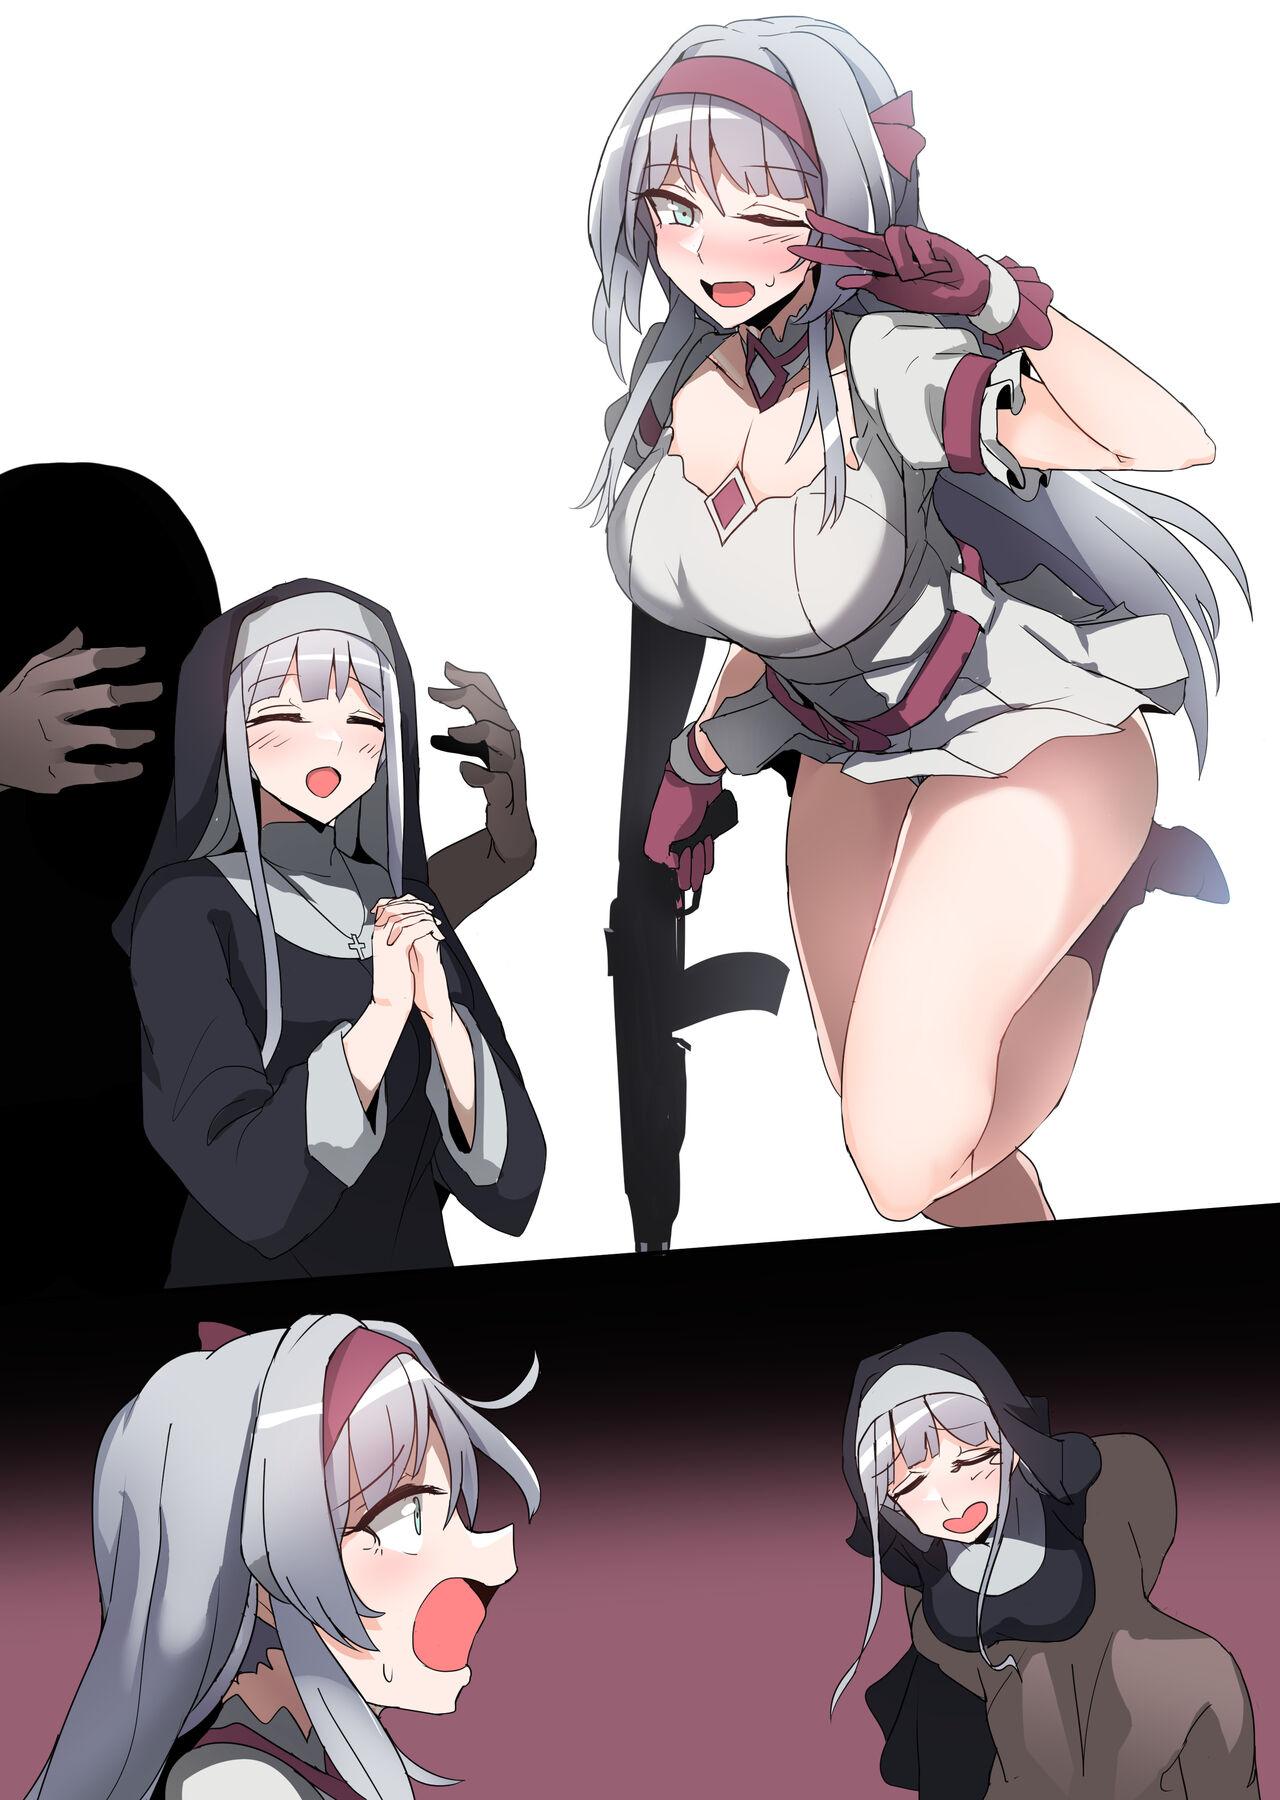 Jock To Be Continued.... - Girls frontline Awesome - Picture 1